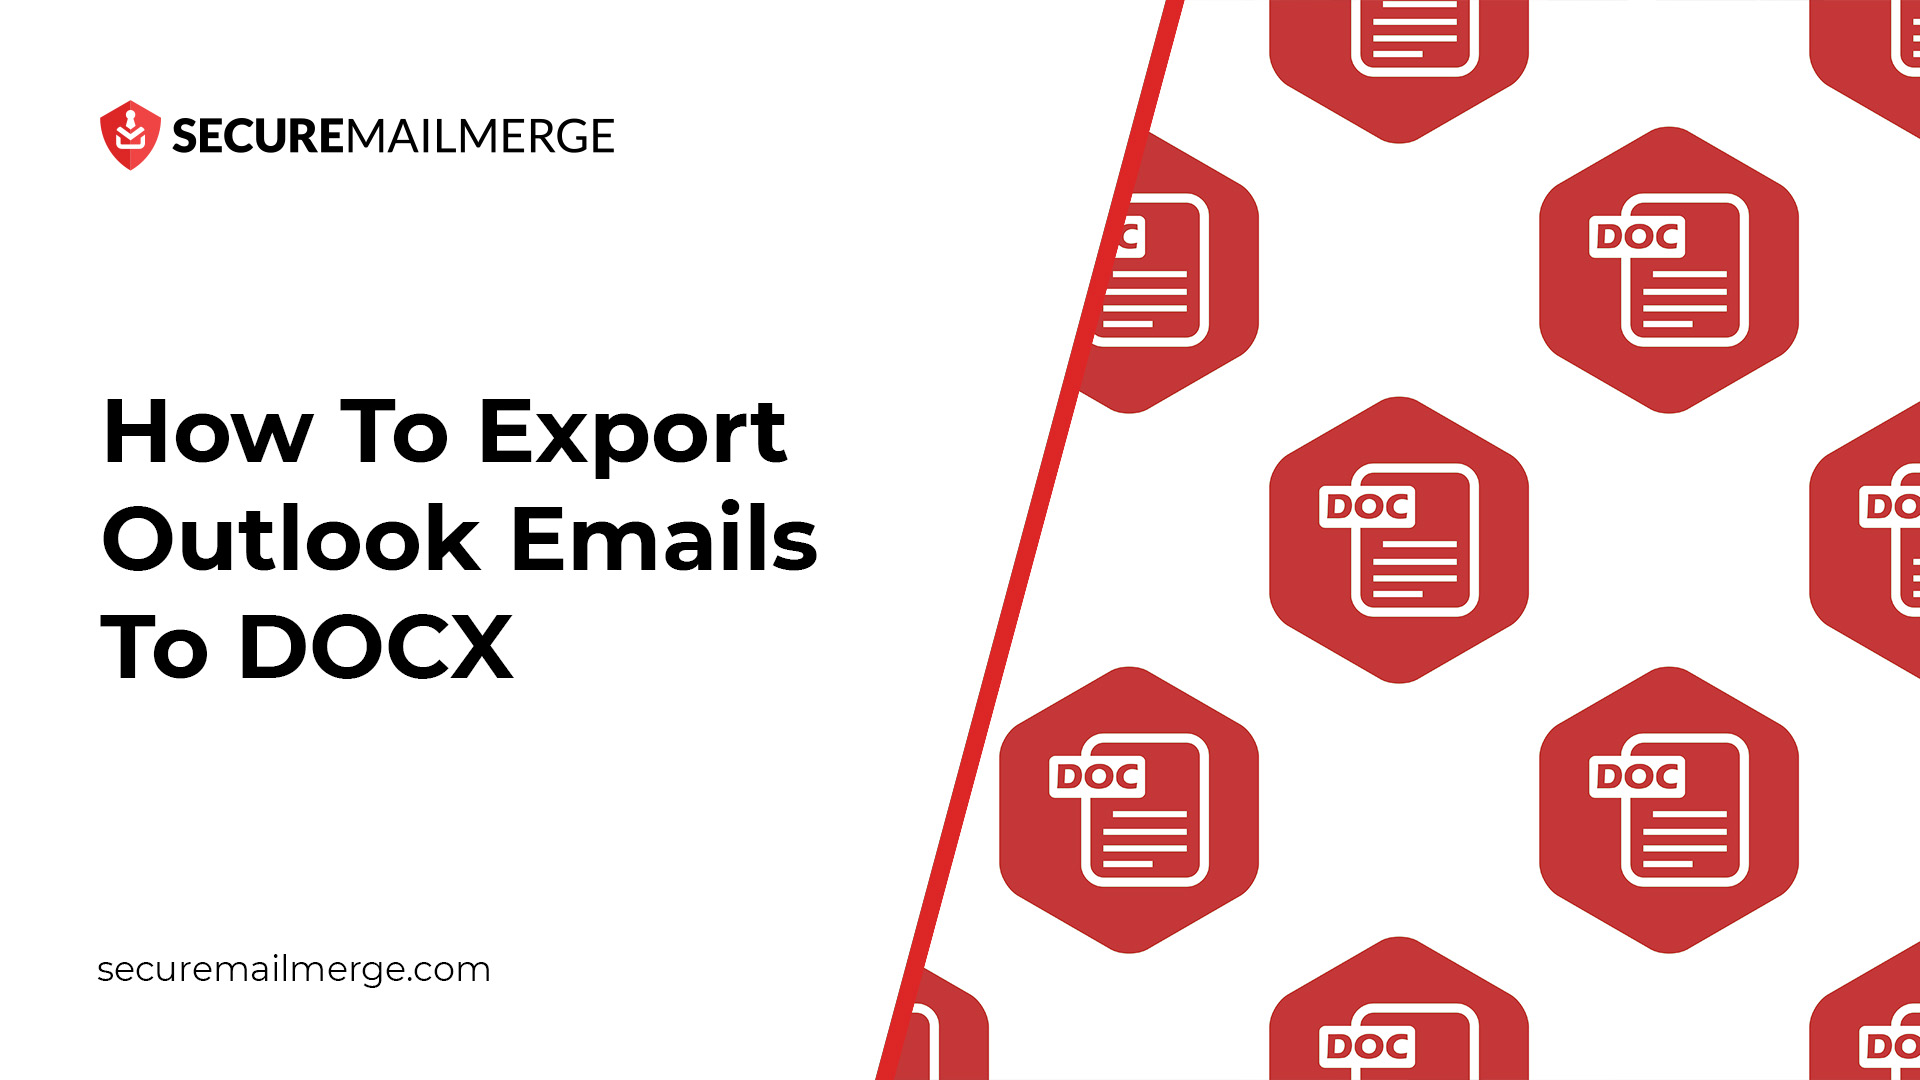 How To Export Outlook Emails To DOCX